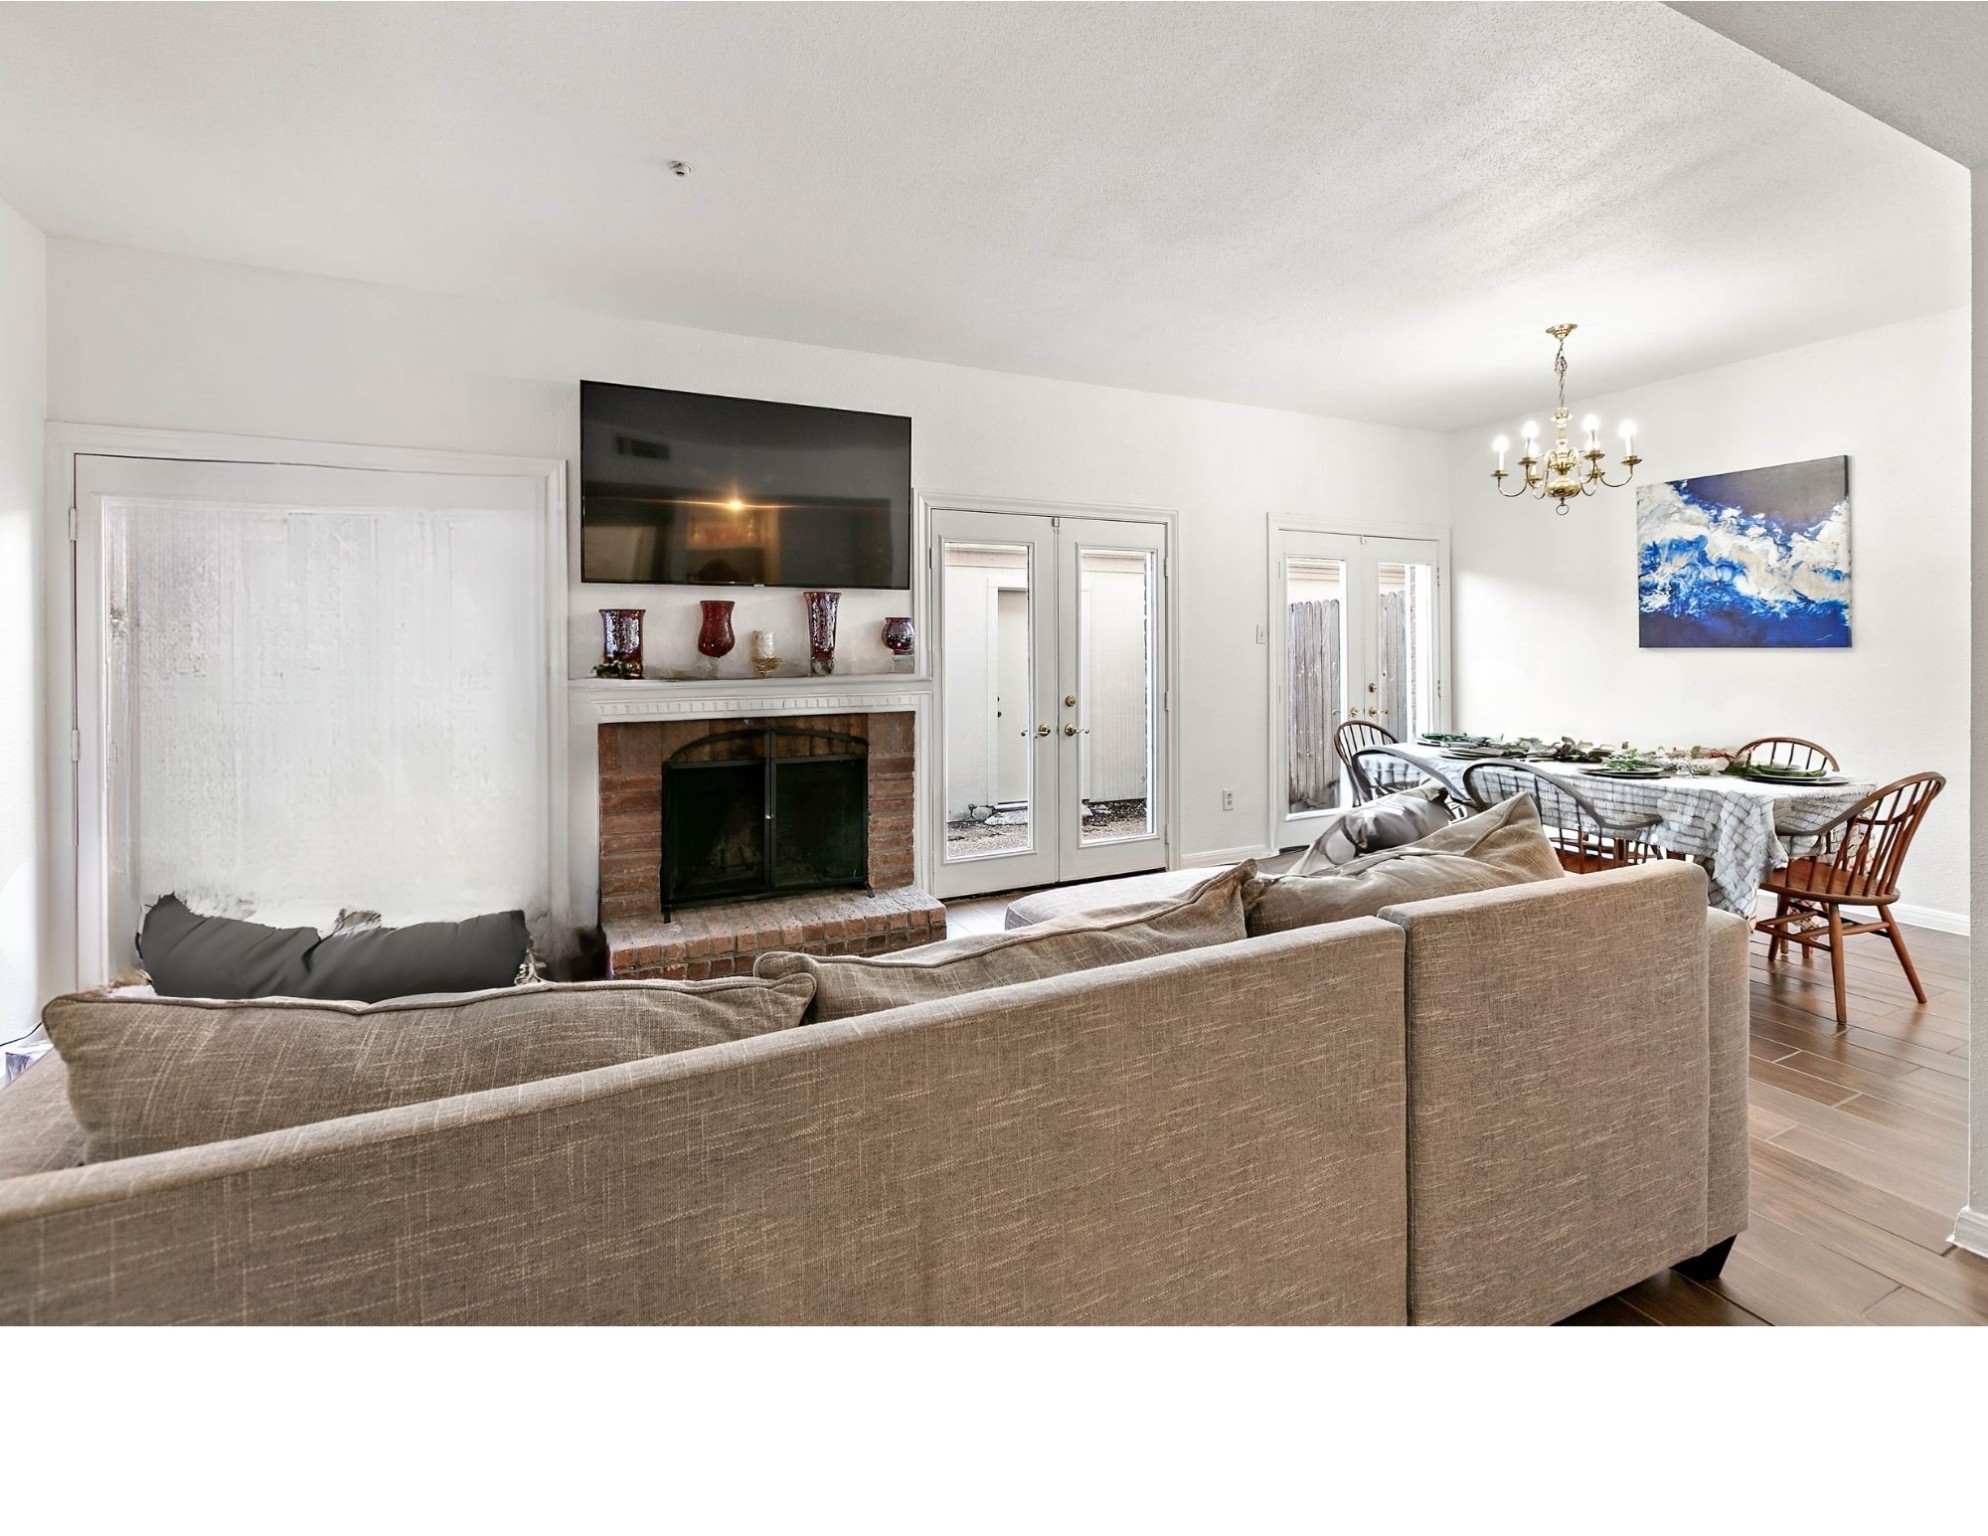 Dining/living combo make for an ideal entertaining space.